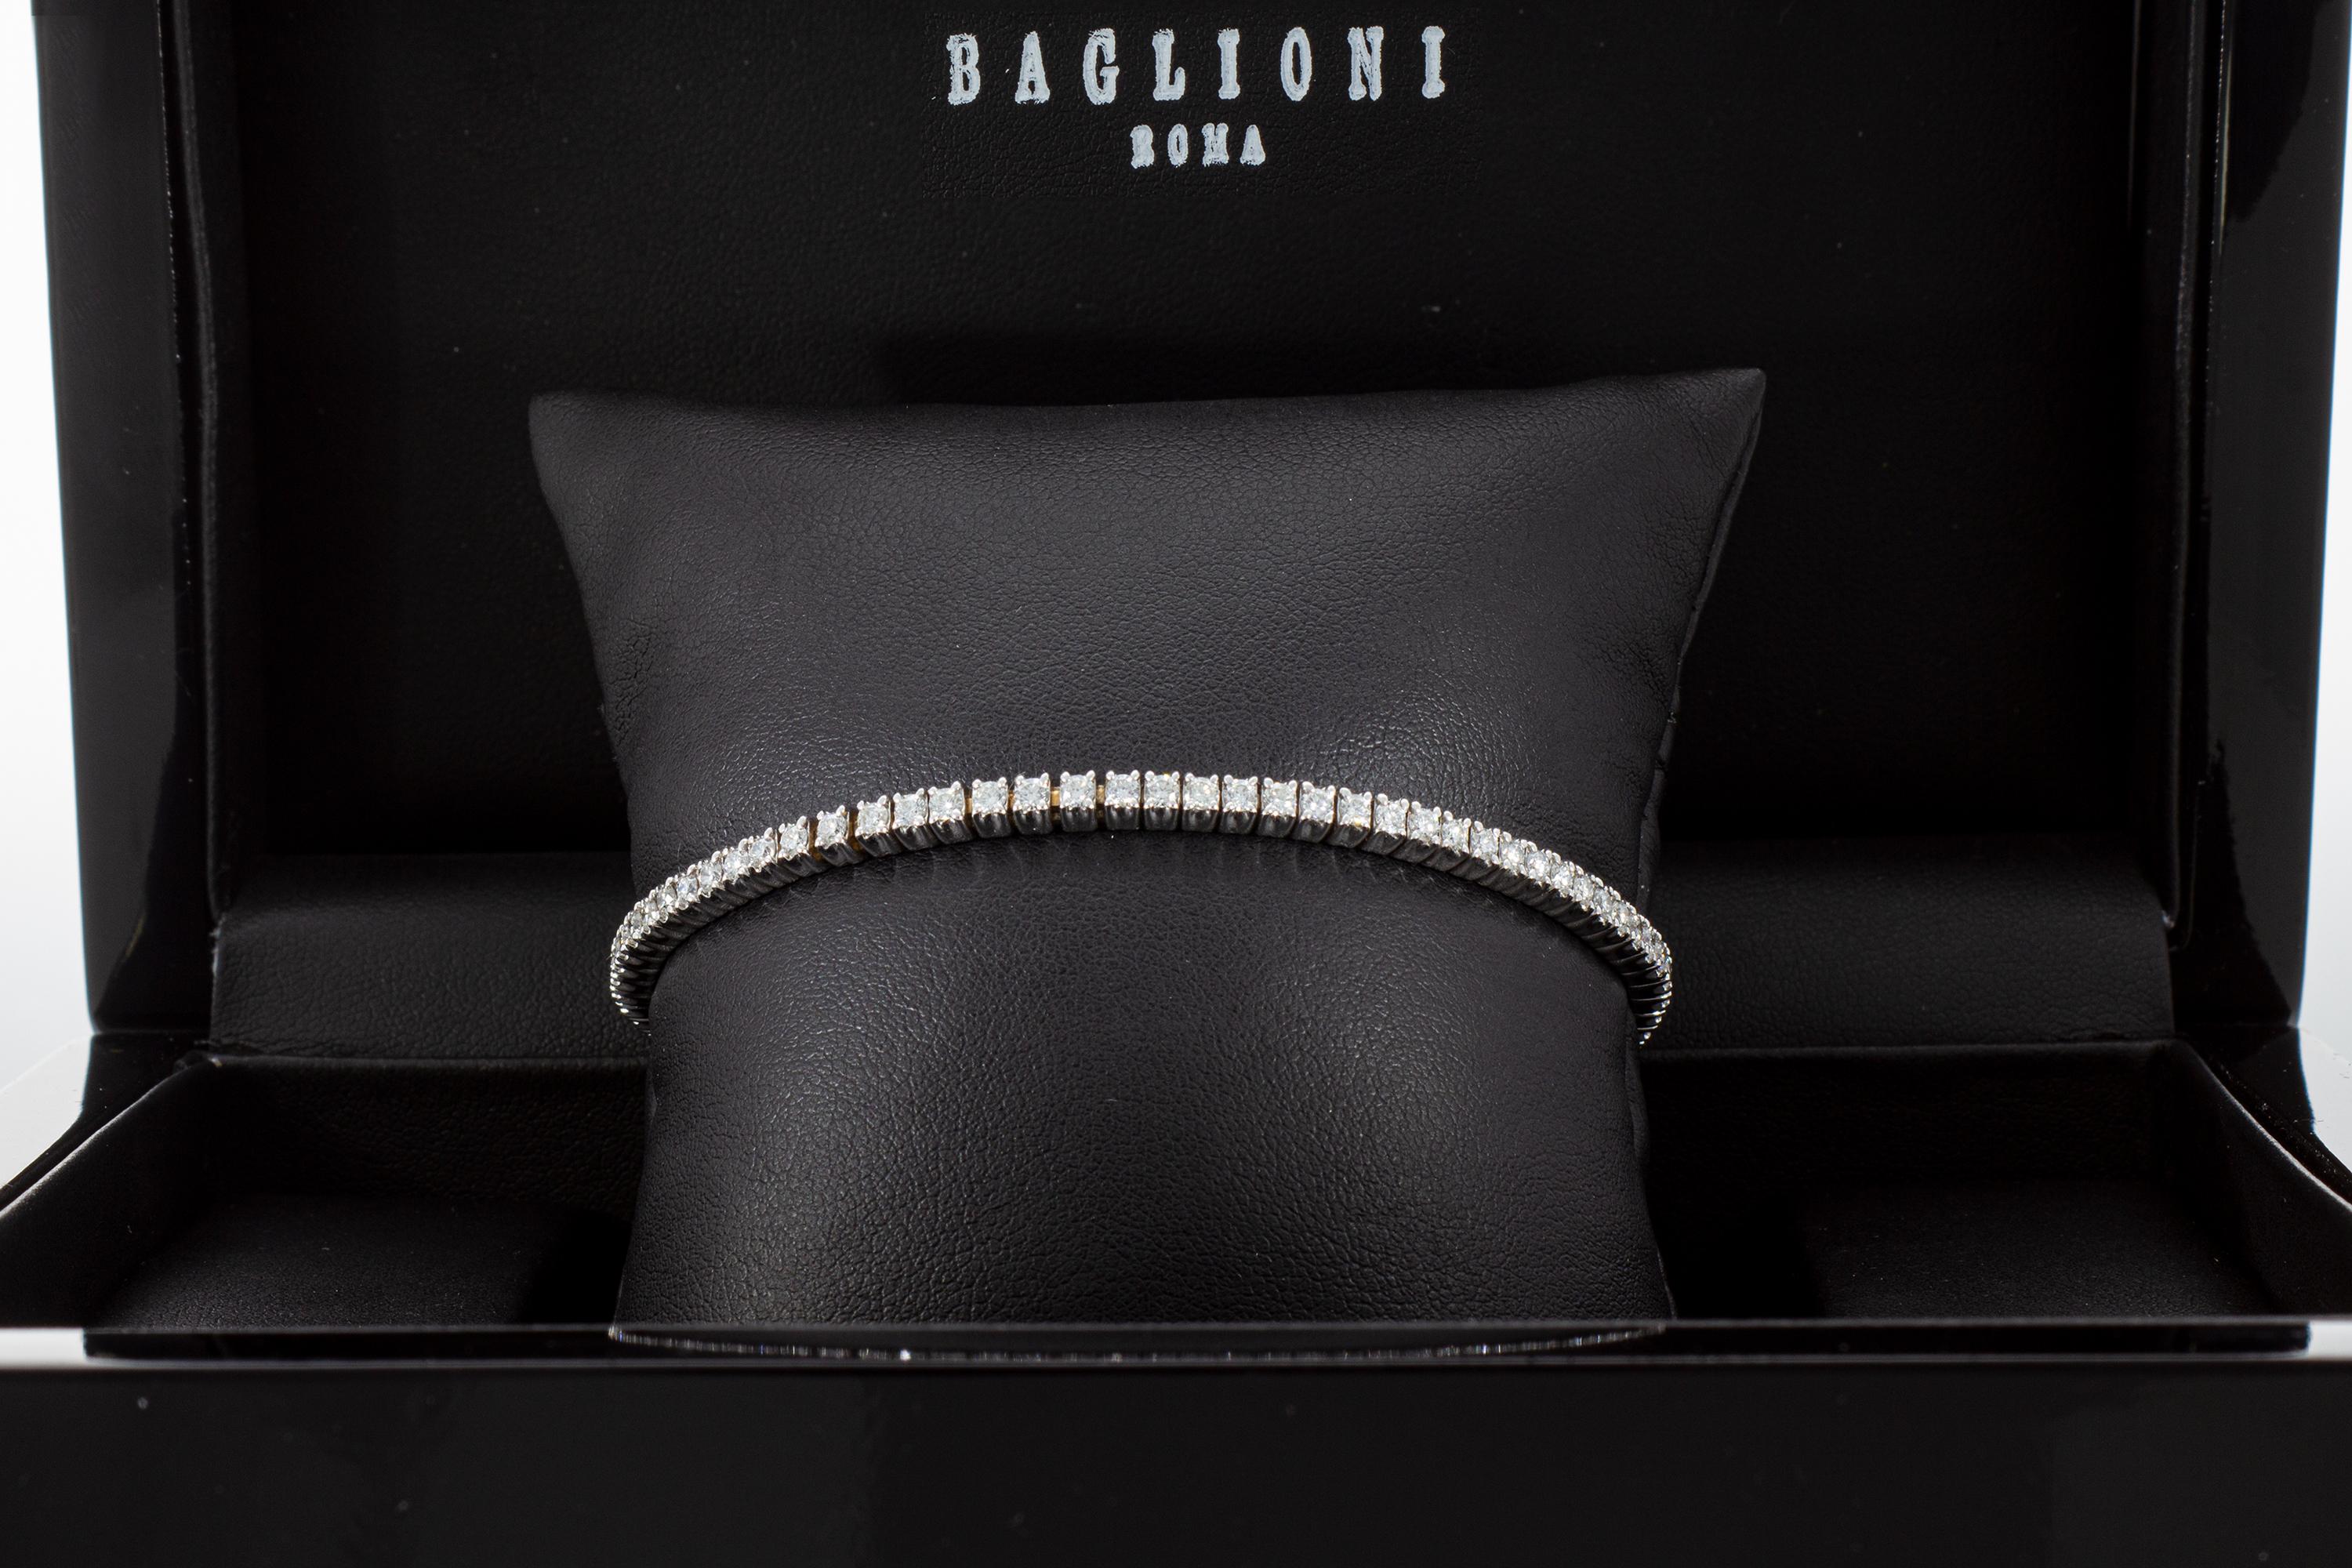 The elastic model bracelet is made up of a row of eighty-one brilliant-cut diamonds with a total weight of 2.85 ct. 
The bracelet is without closure as it is extensible. 
18 kt white gold bracelet.
Number of Diamonds: 81
Weight of Diamonds: ct